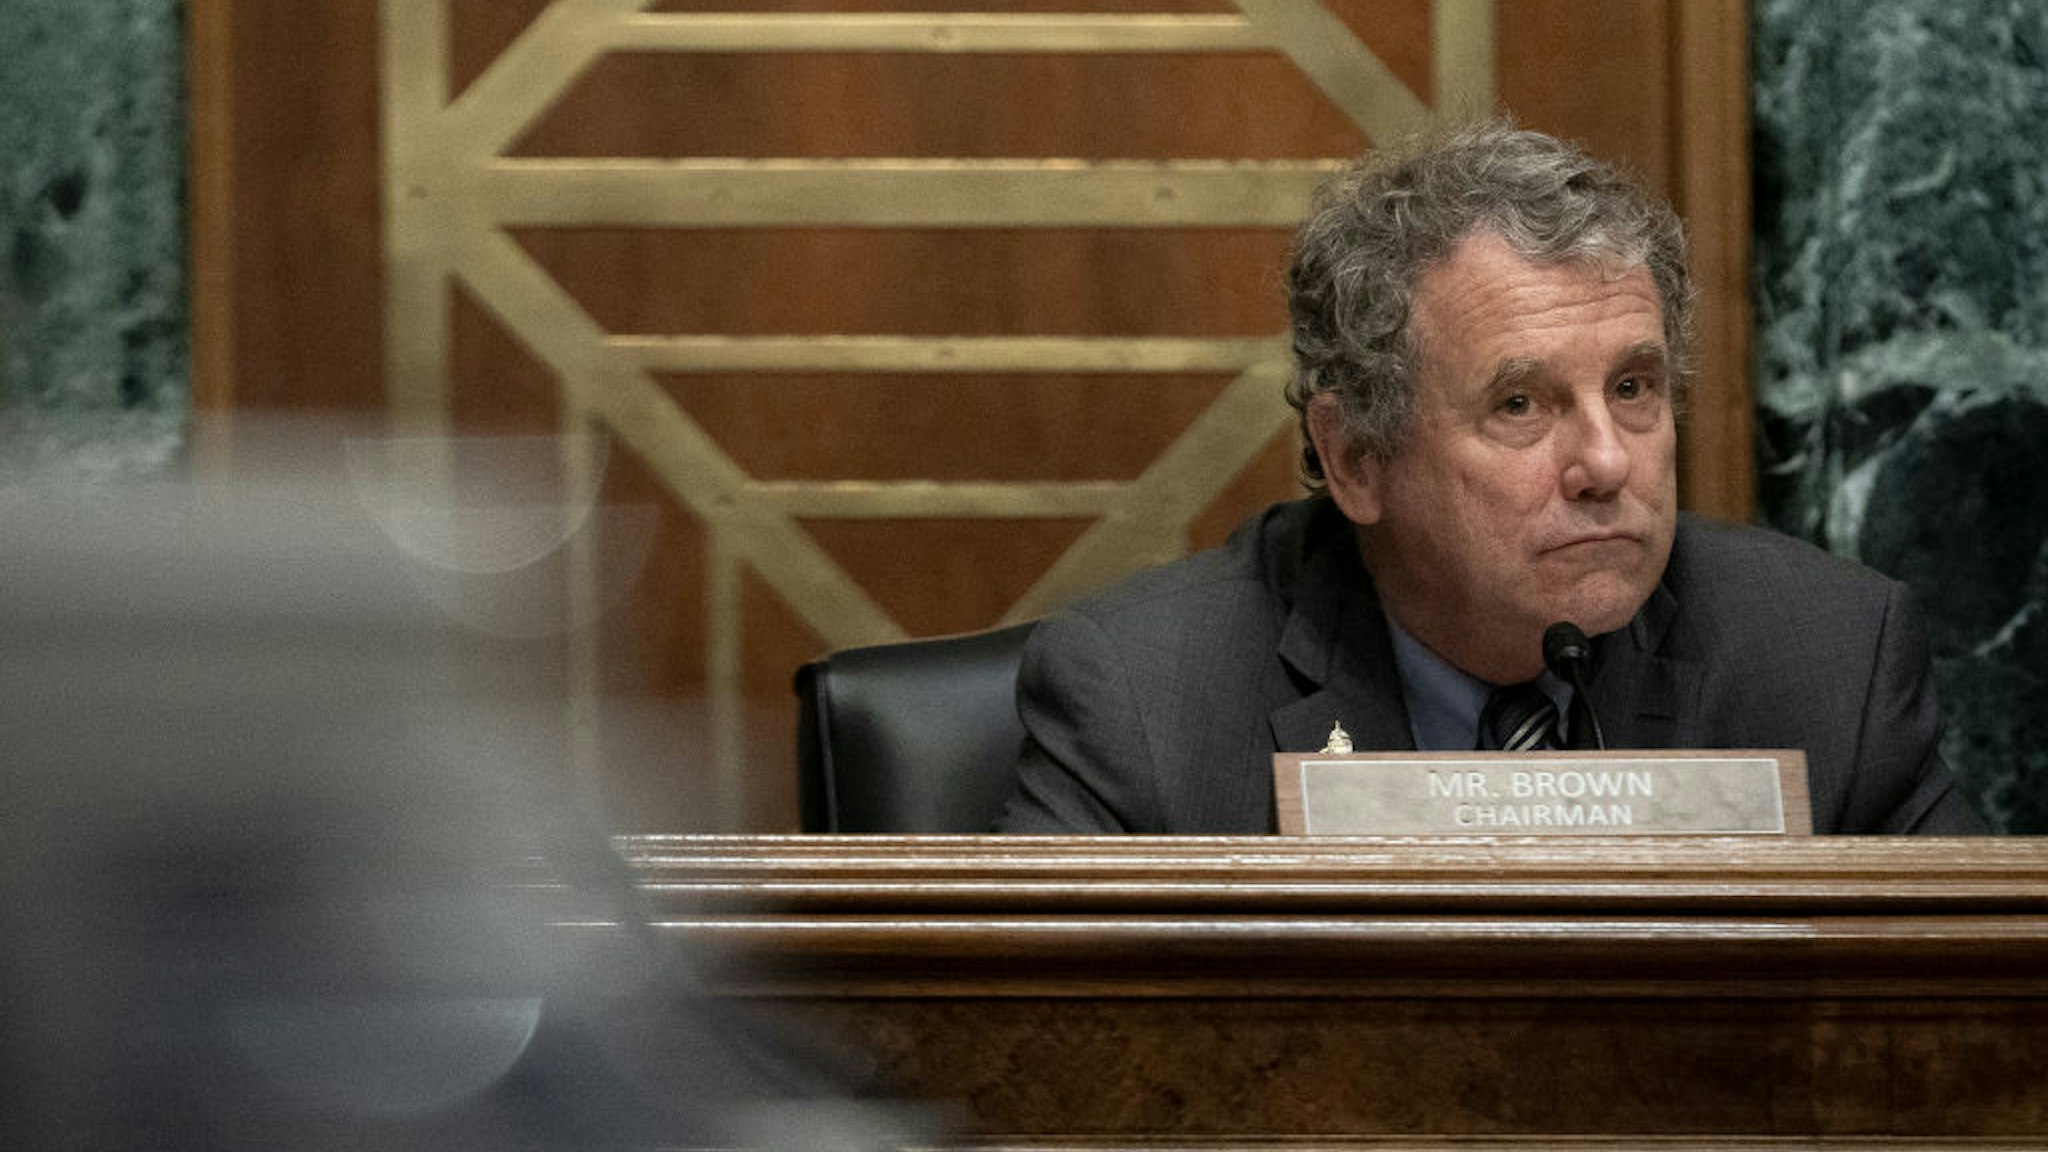 Senator Sherrod Brown, a Democrat from Ohio and chairman of the Senate Banking, Housing, and Urban Affairs Committee, listens during a confirmation hearing in Washington, D.C., U.S., on Tuesday, June 22, 2021